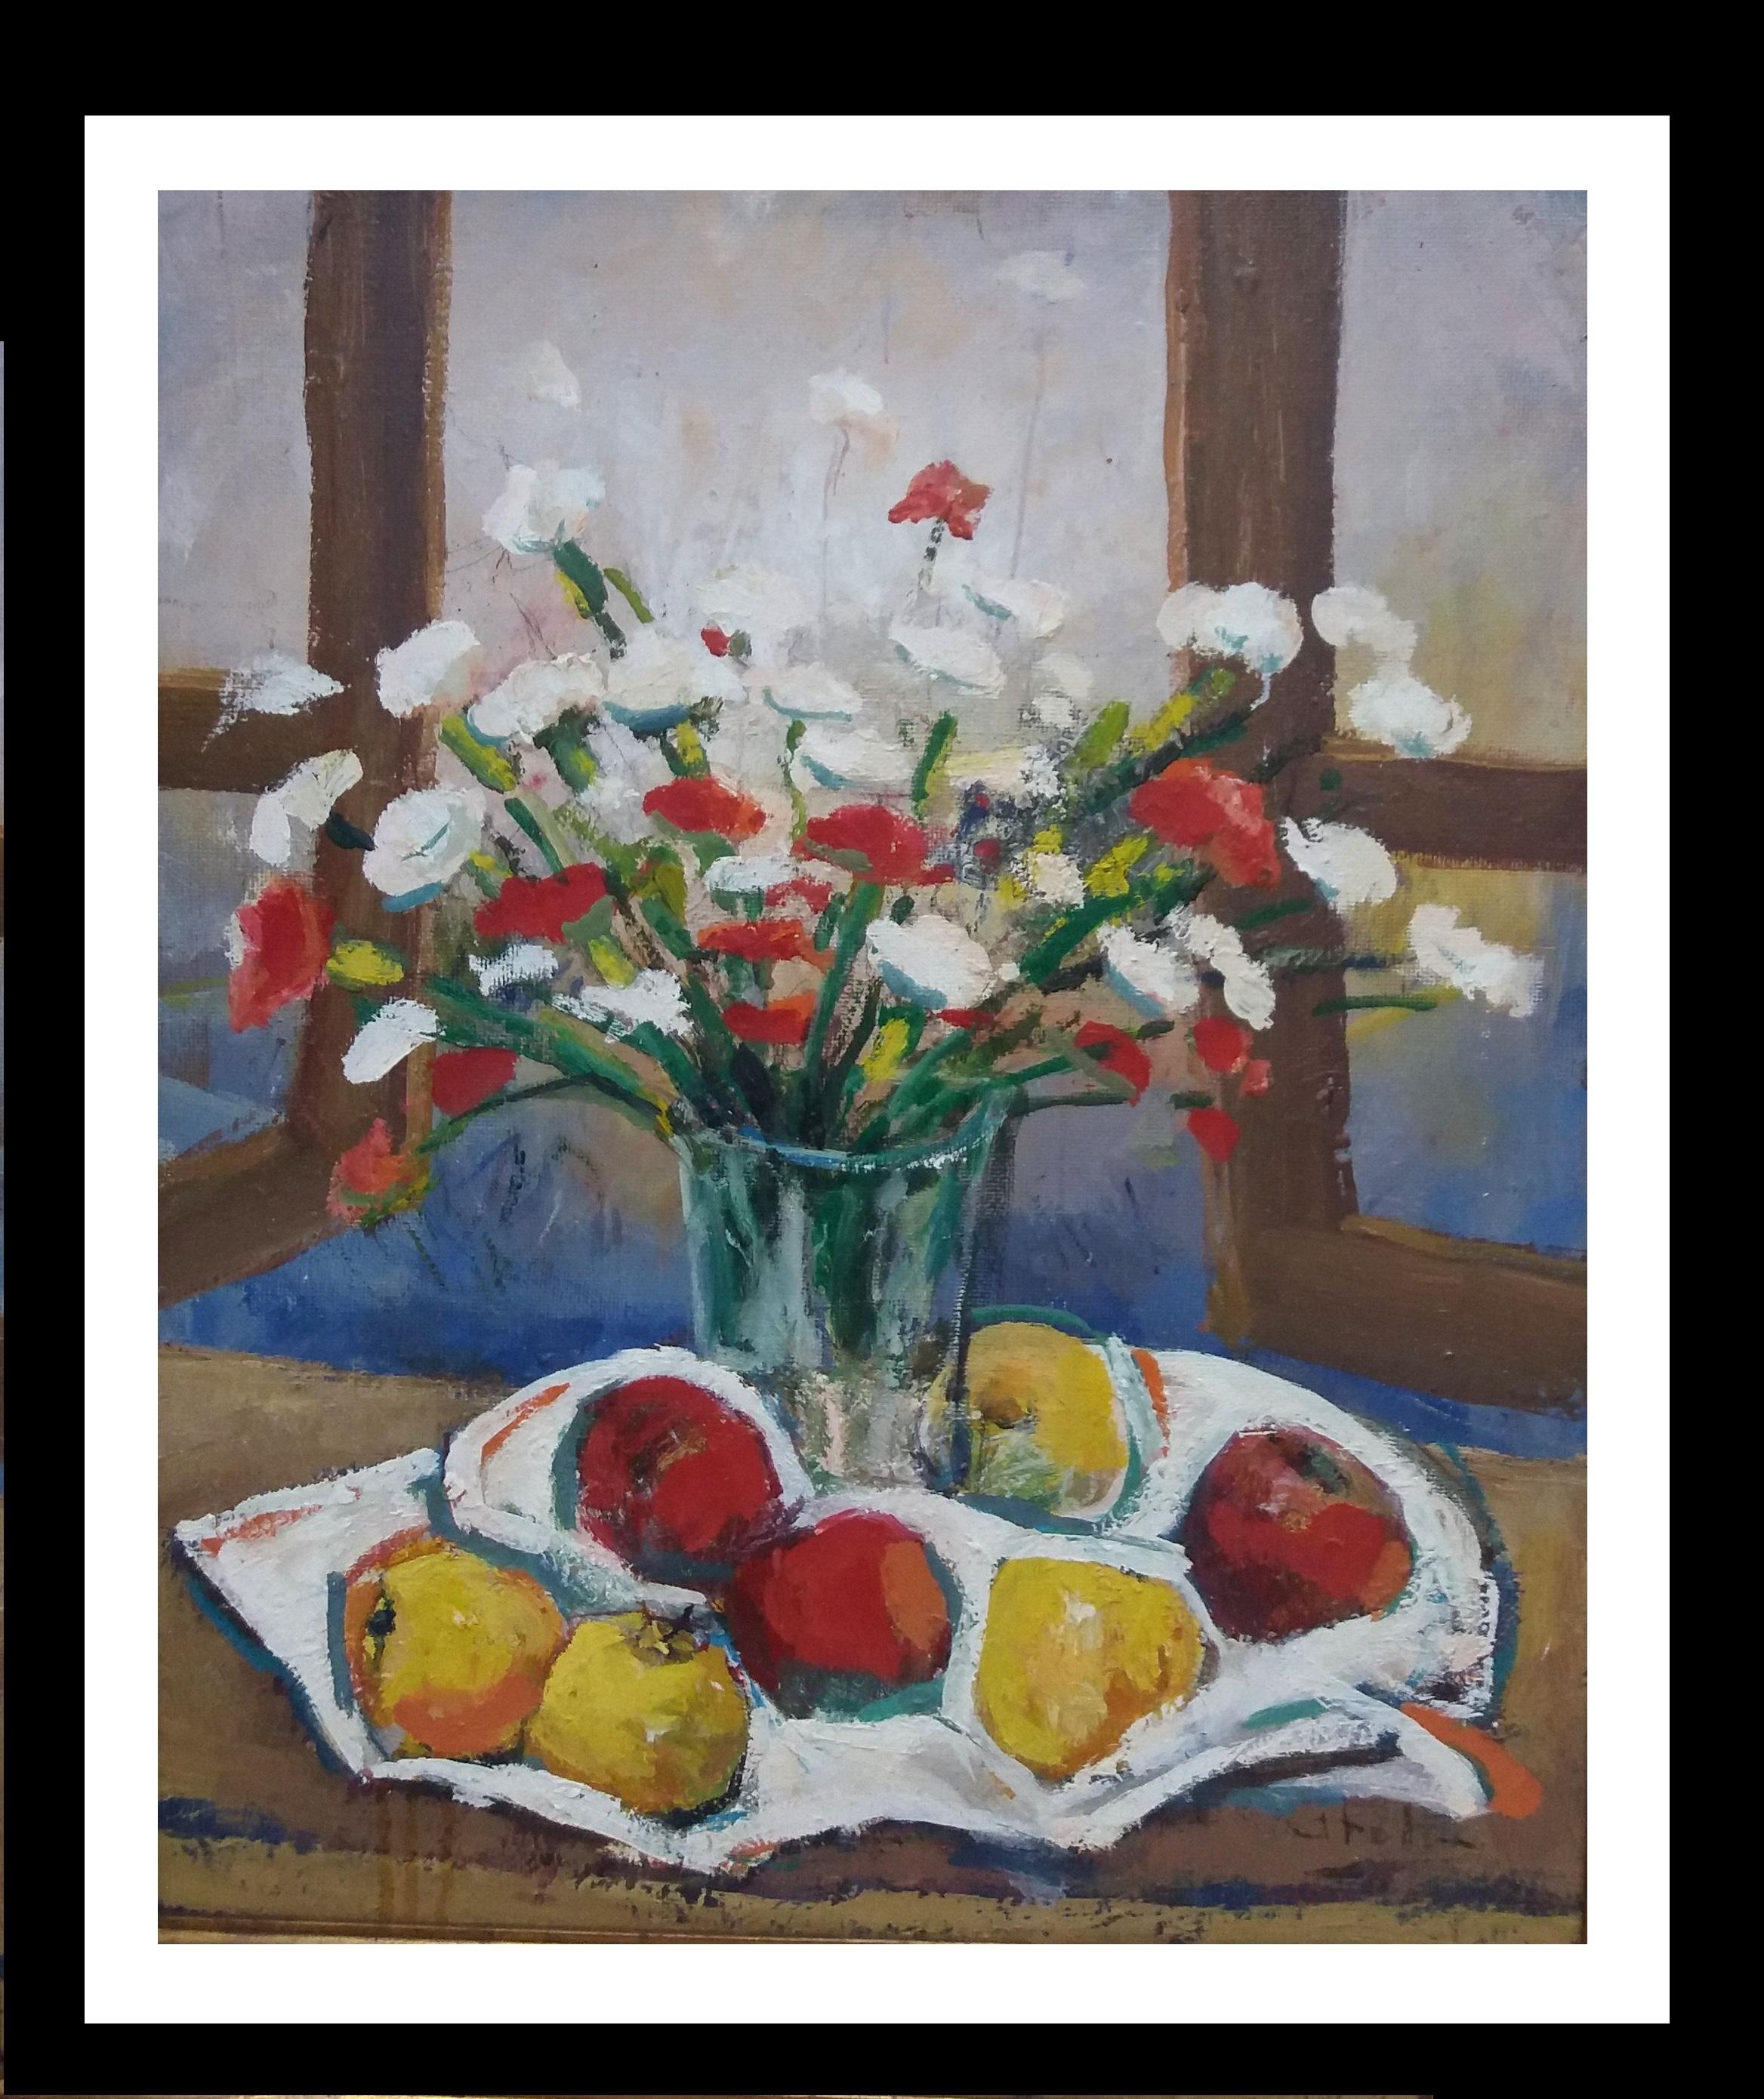  Abella  Flowers and Fruits   original still life Cubist acrylic painting